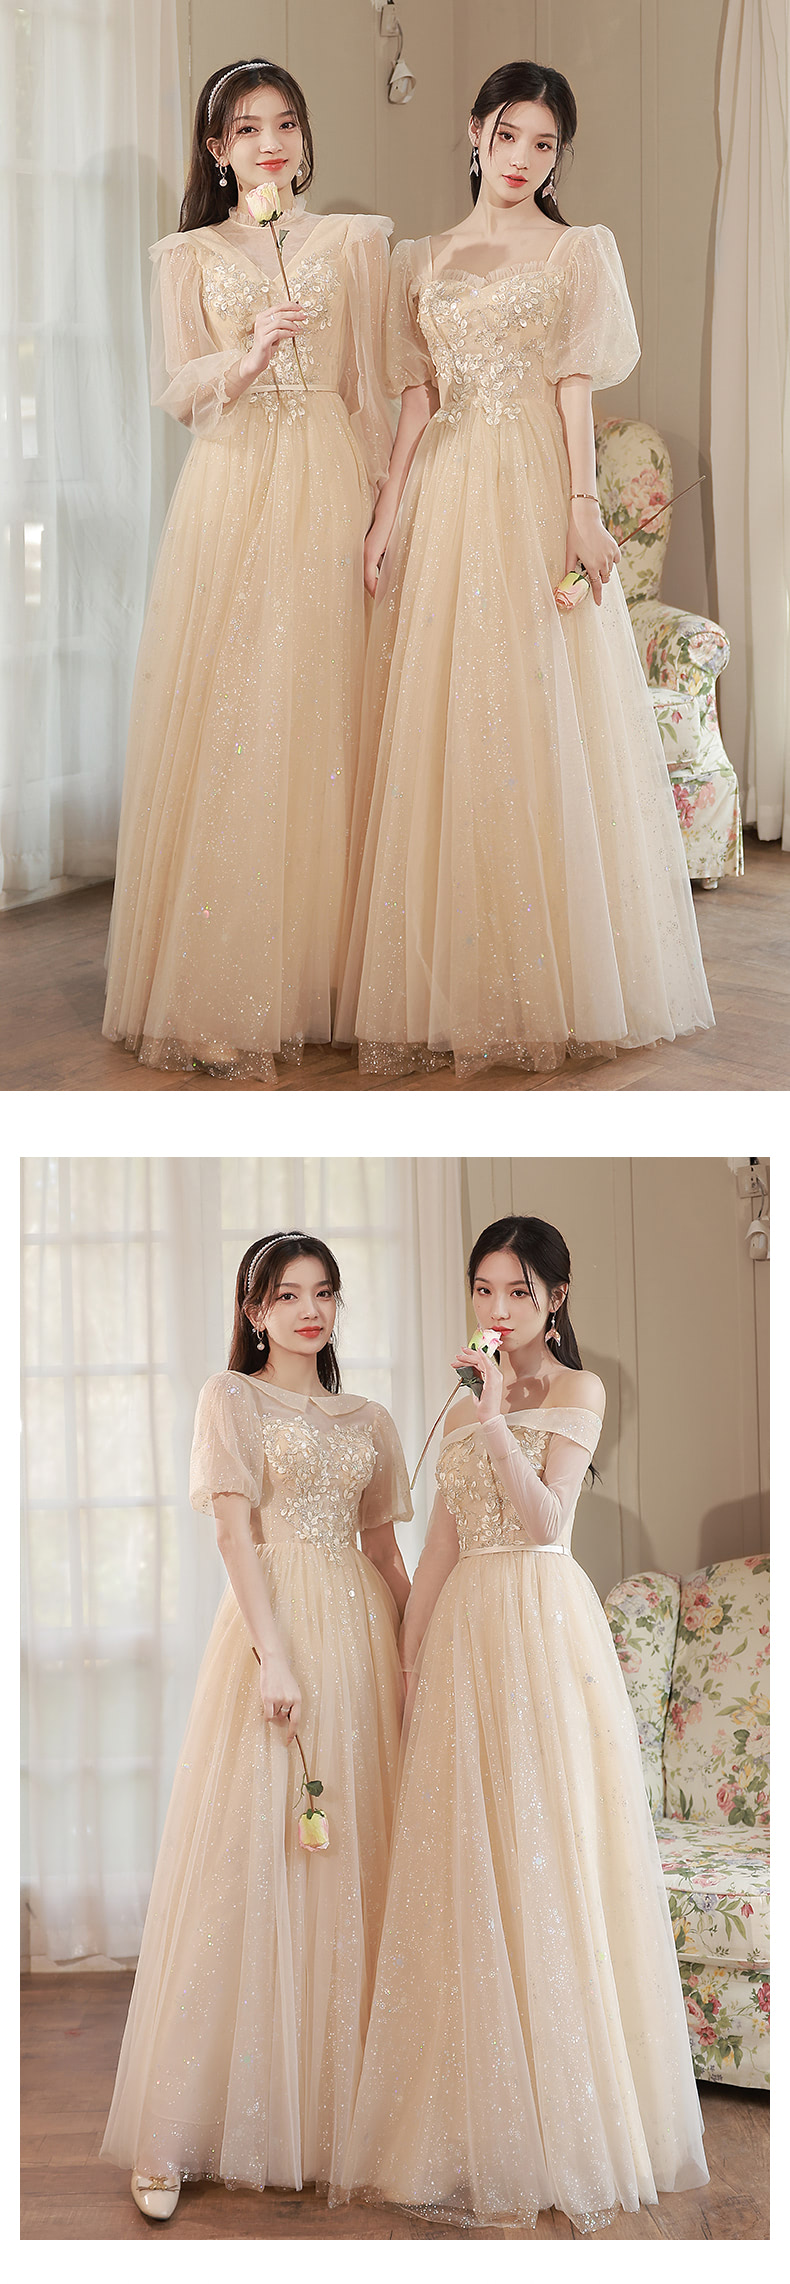 Charming-Embroidery-Bridesmaid-Dress-Banquet-Party-Ball-Gown13